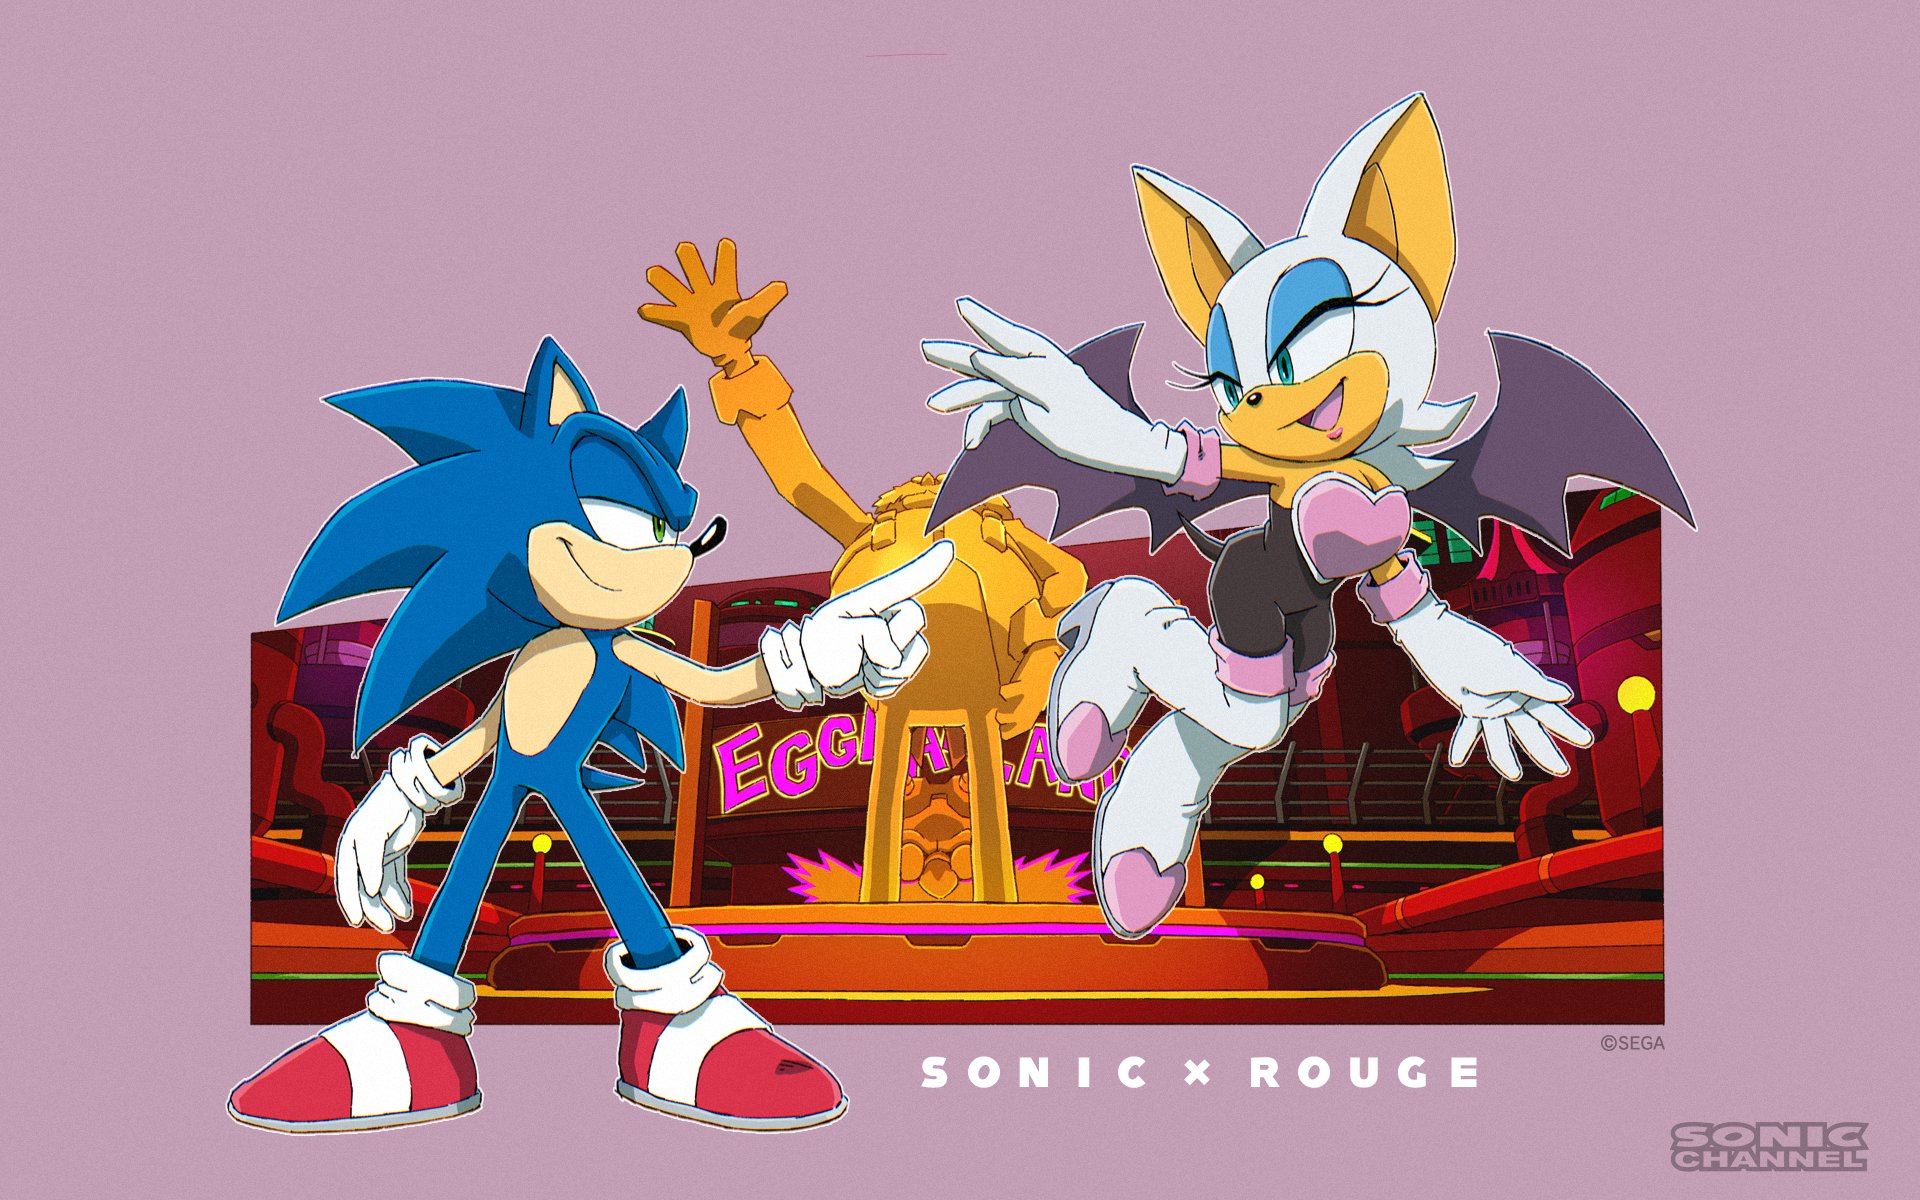 video game, sonic the hedgehog, rouge the bat, sonic channel, sonic